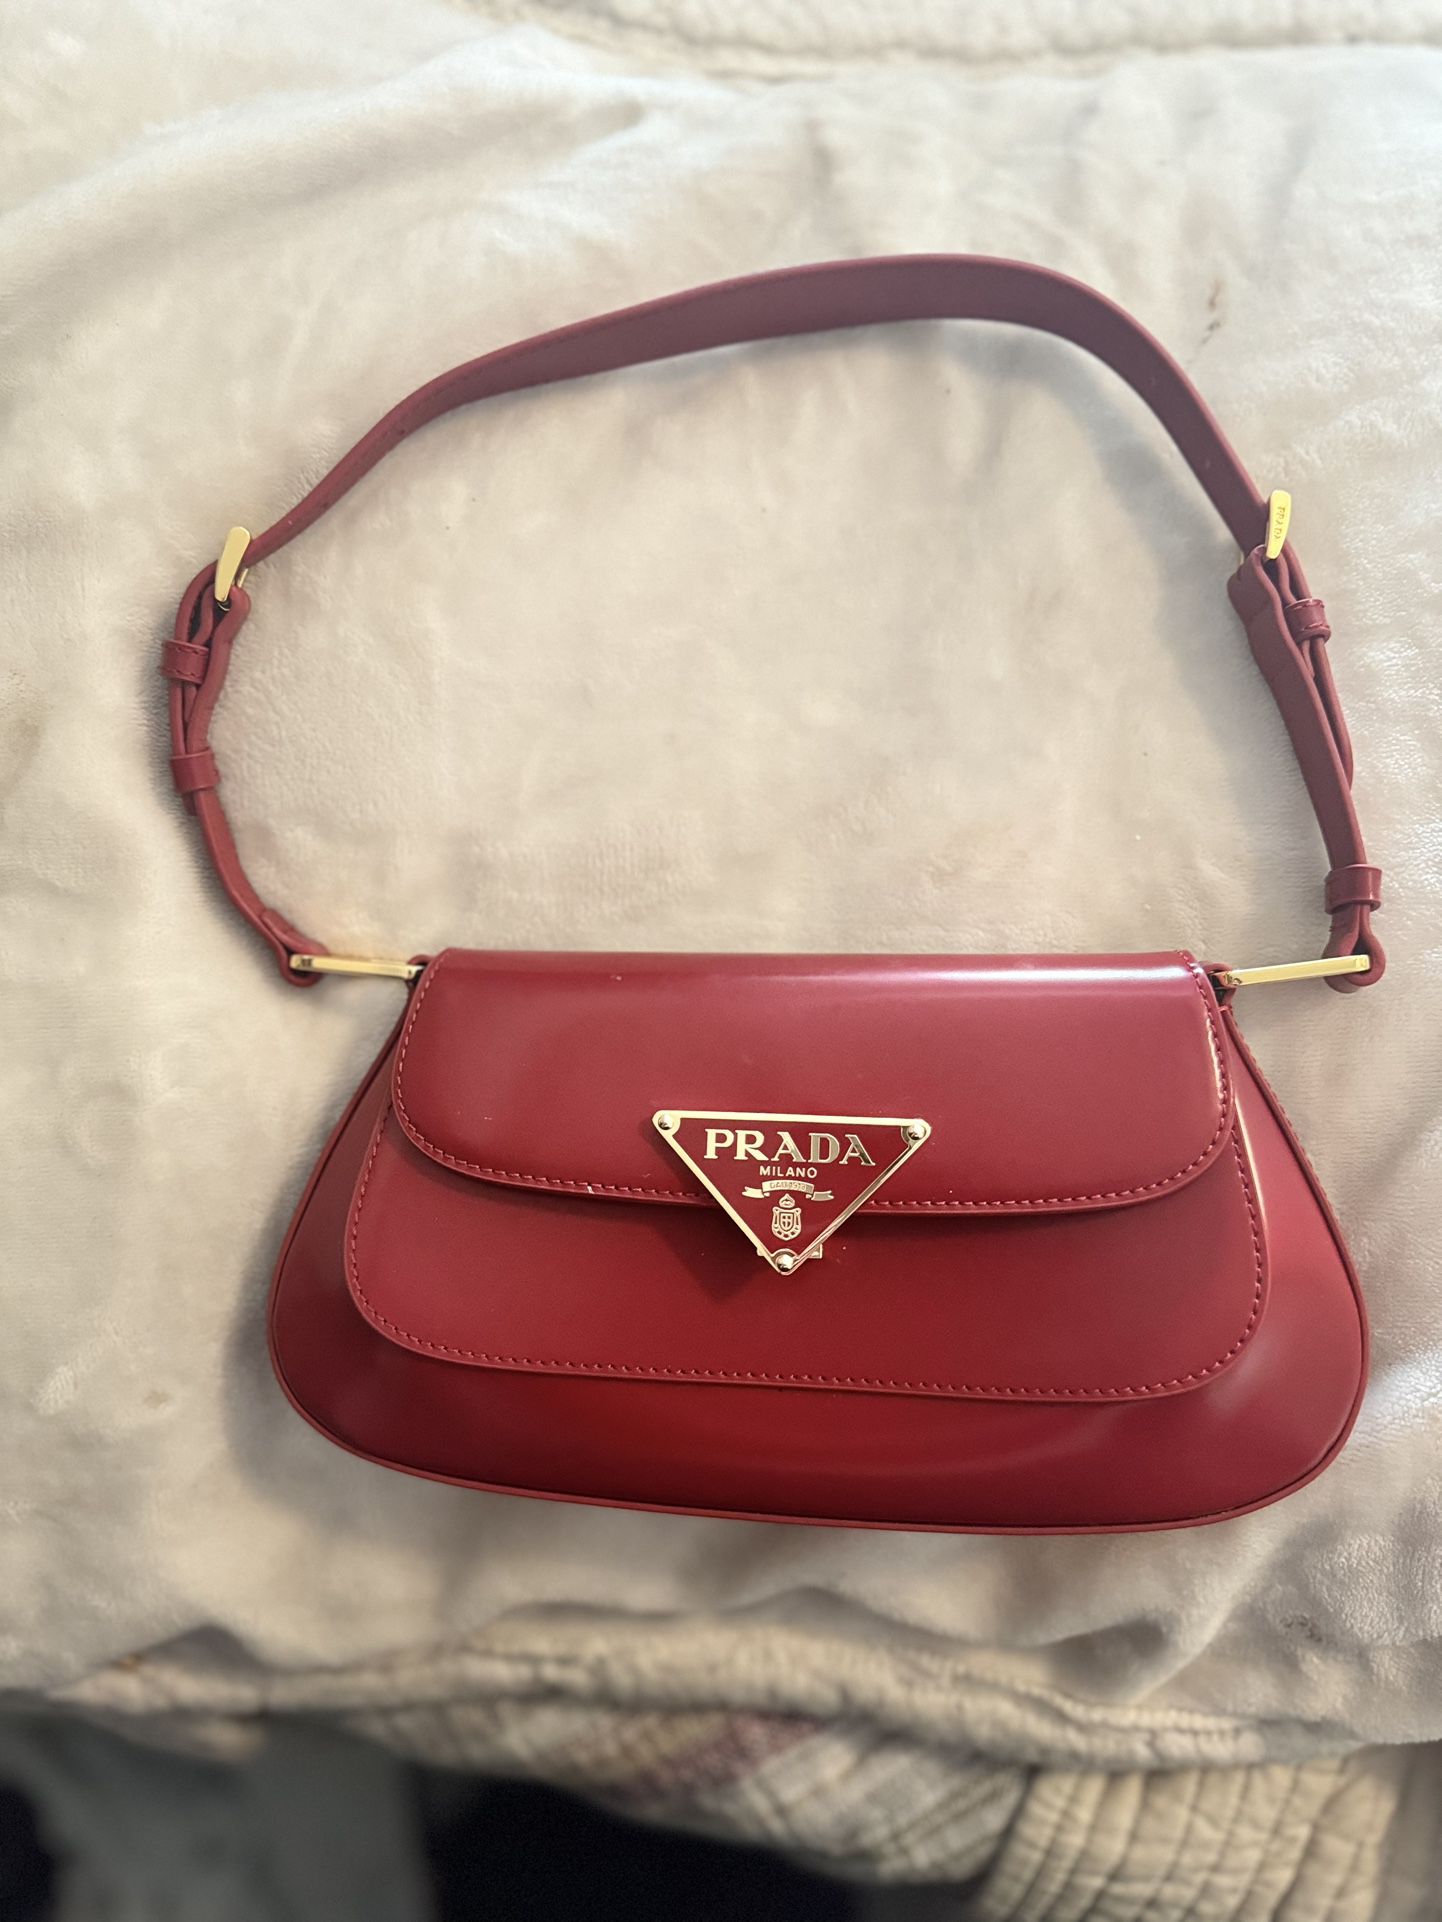 AUTHENTIC Prada Cleo Red leather Bag MINT CONDITION